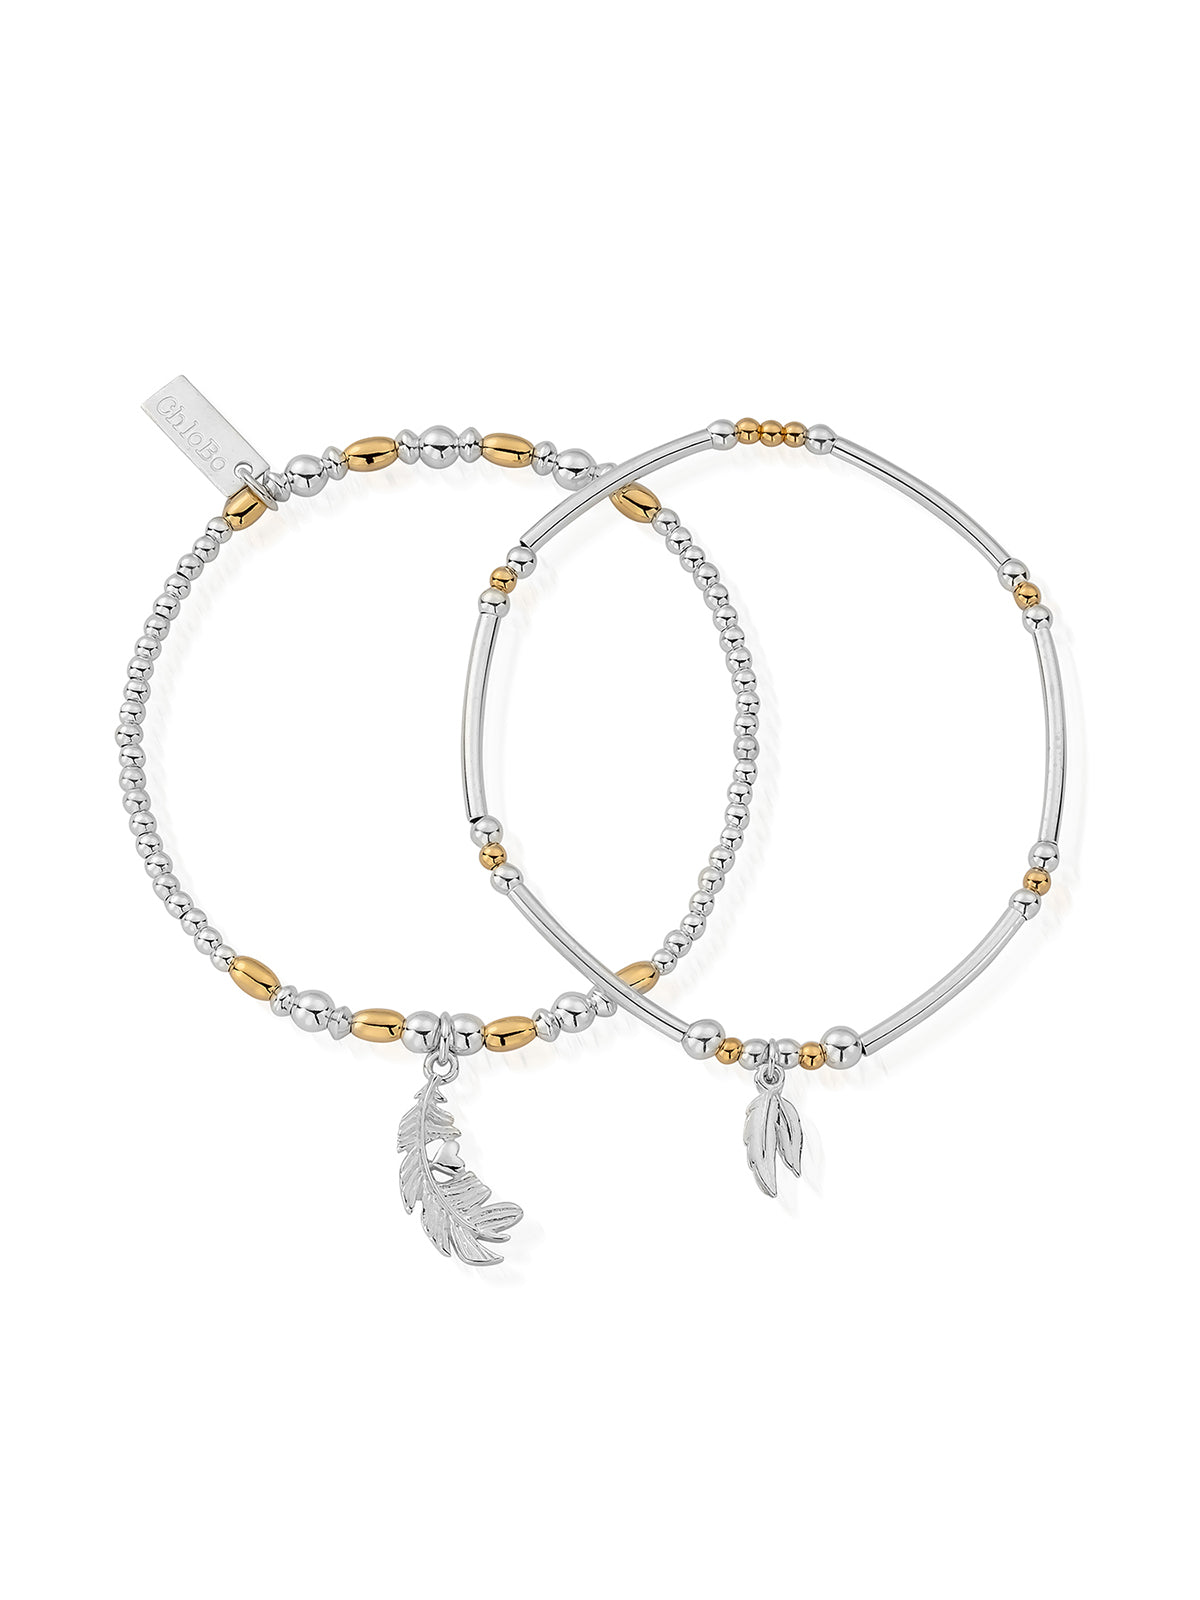 ChloBo Strength & Courage Set of 2 Bracelets in Silver & Gold Plating GMBSET596584